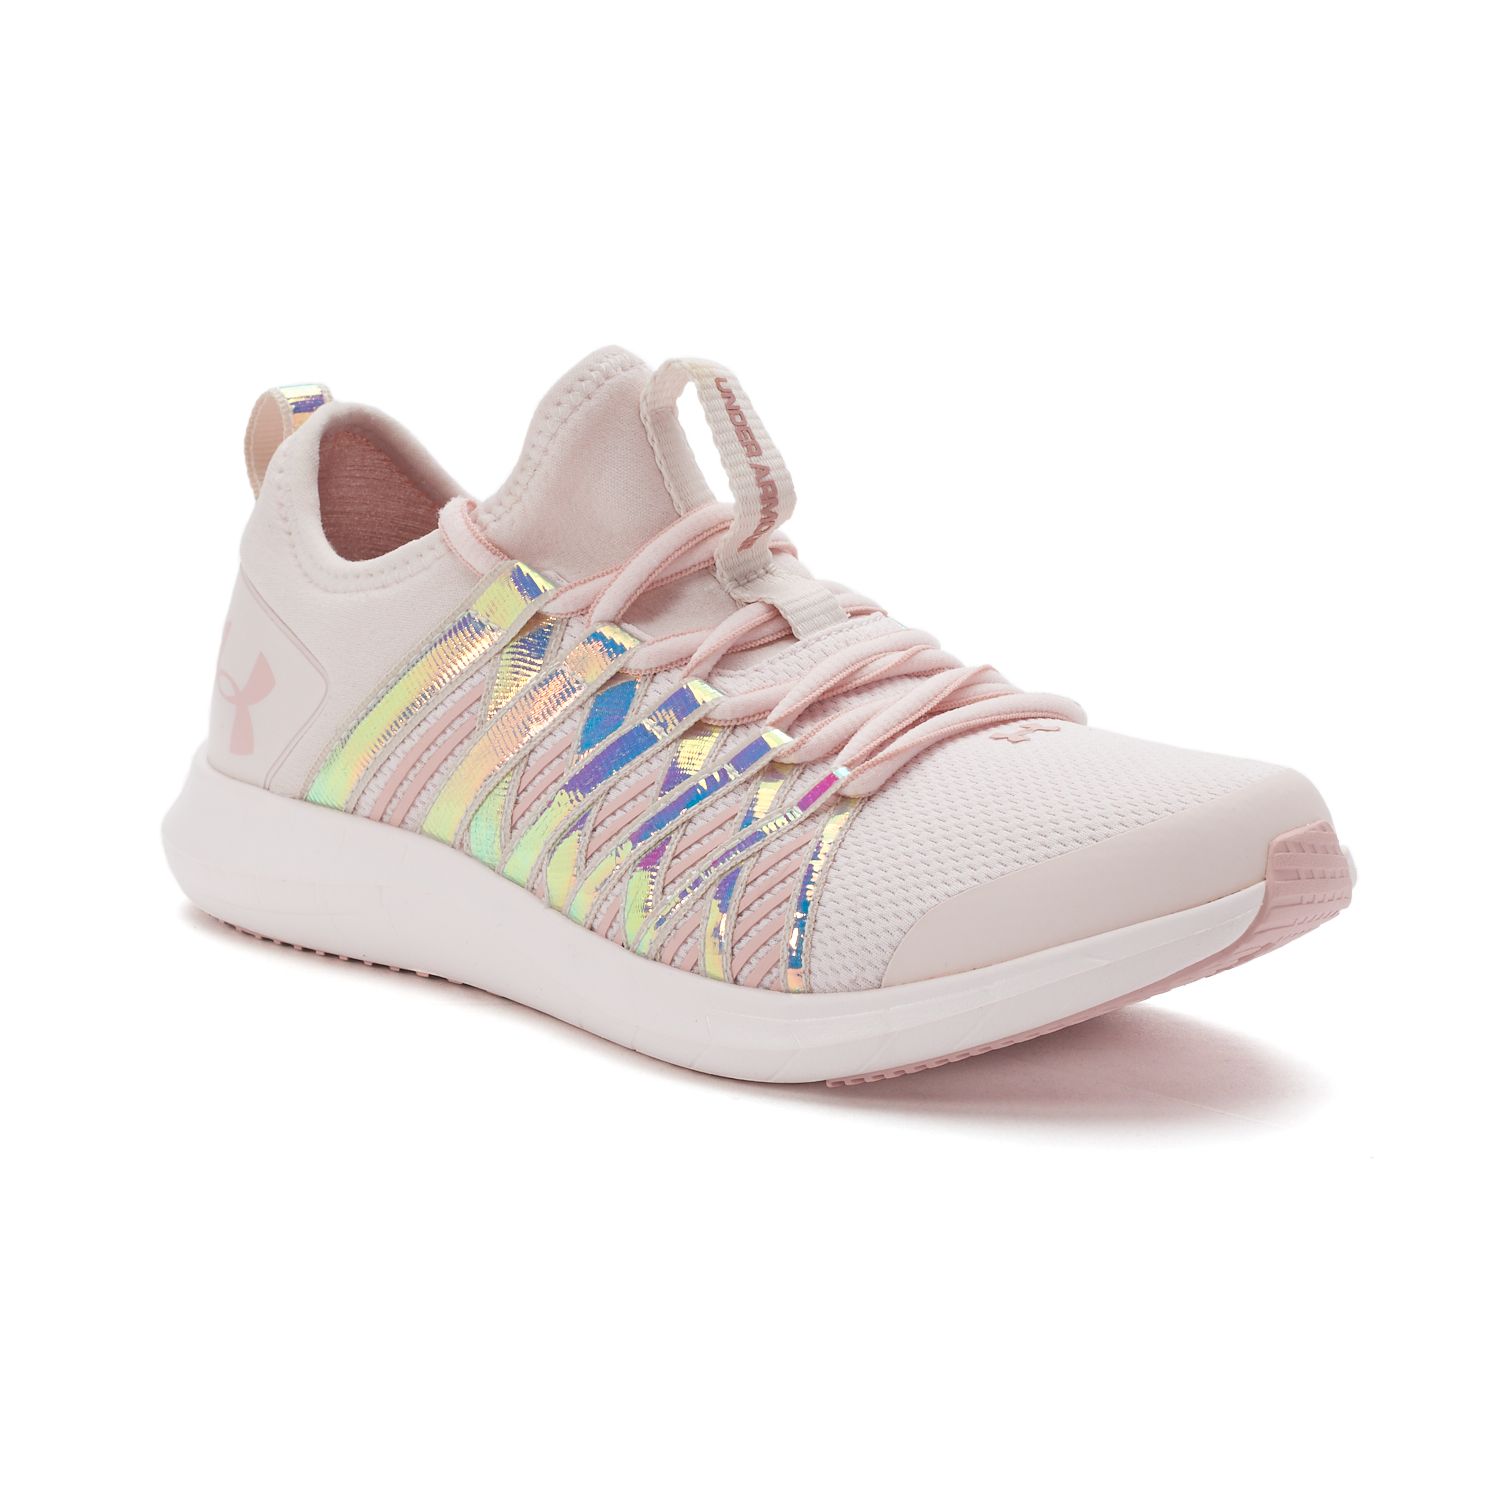 Under Armour Infinity Girls' Sneakers